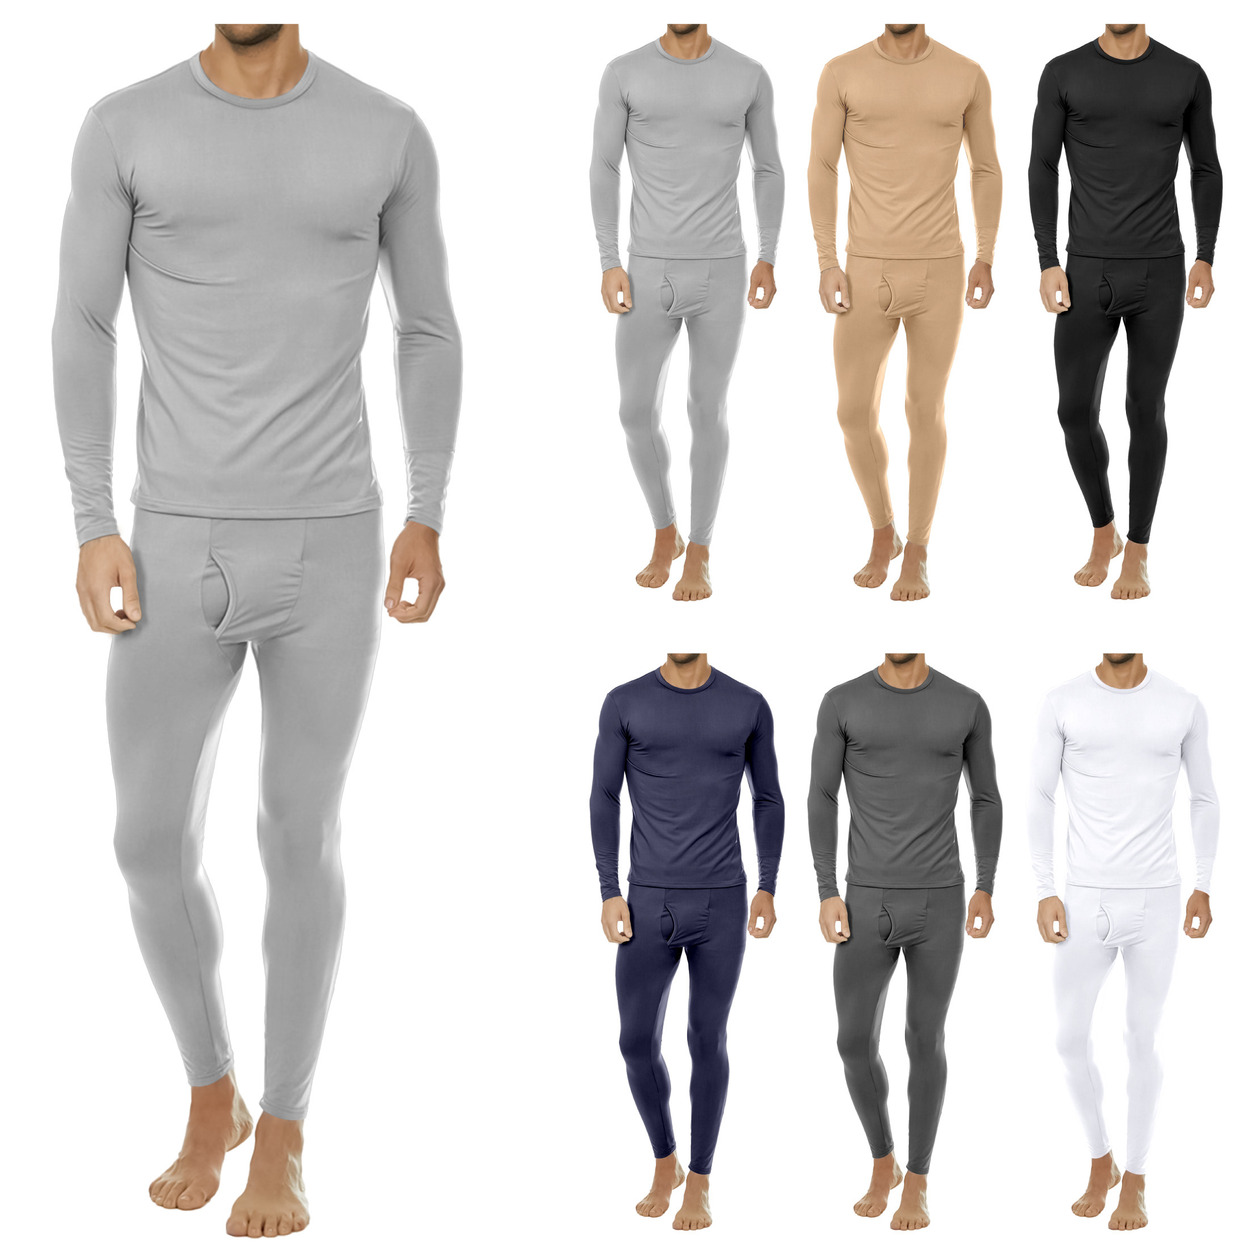 2-Sets: Men's Winter Warm Fleece Lined Thermal Underwear Set For Cold Weather - White&white, Medium